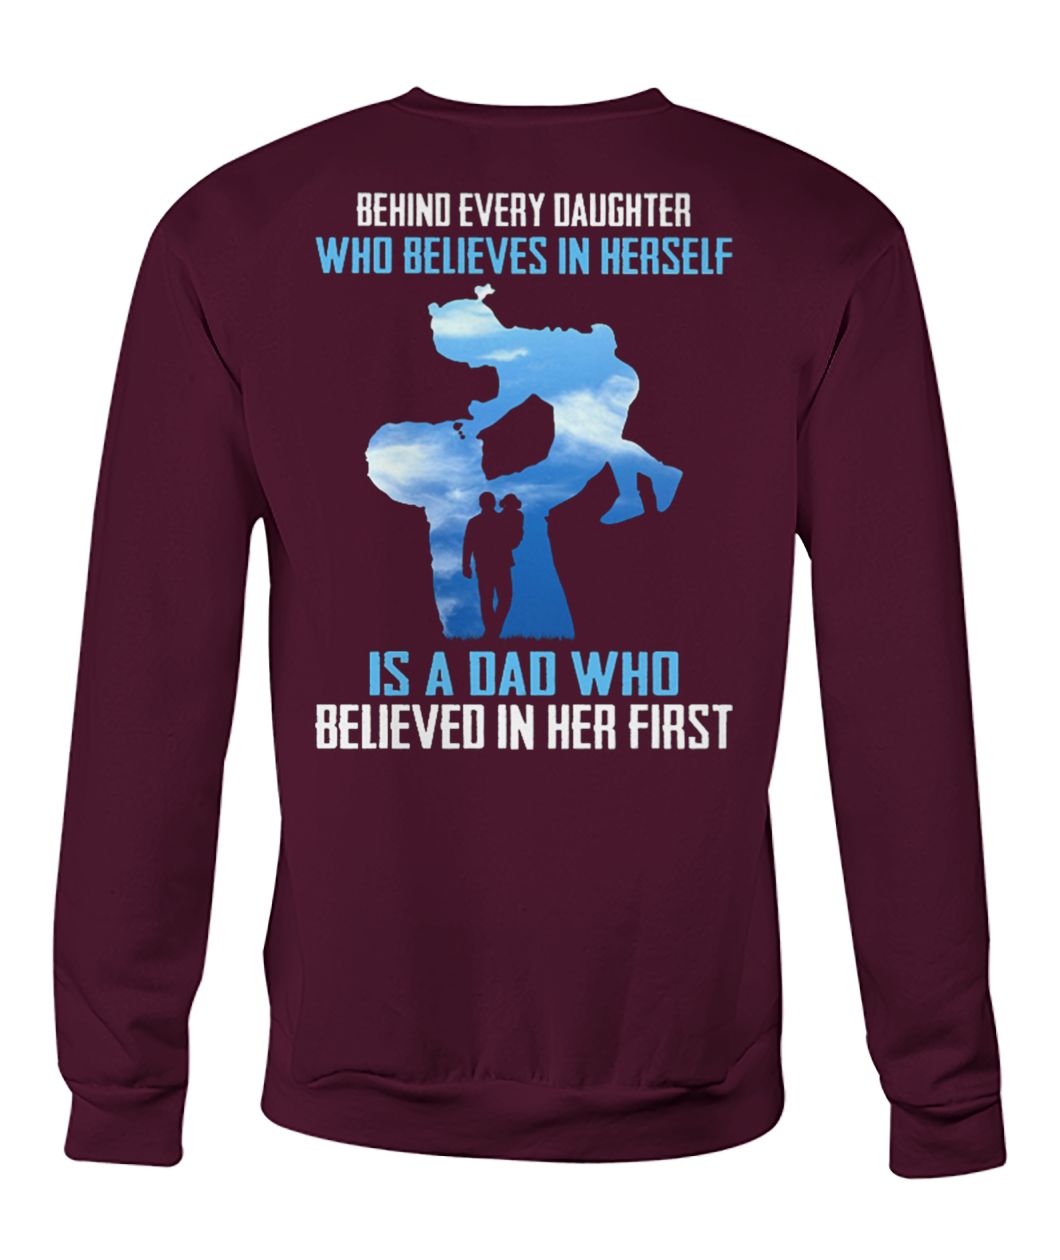 Behind every daughter who believes in herself is a dad who believed in her first crew neck sweatshirt